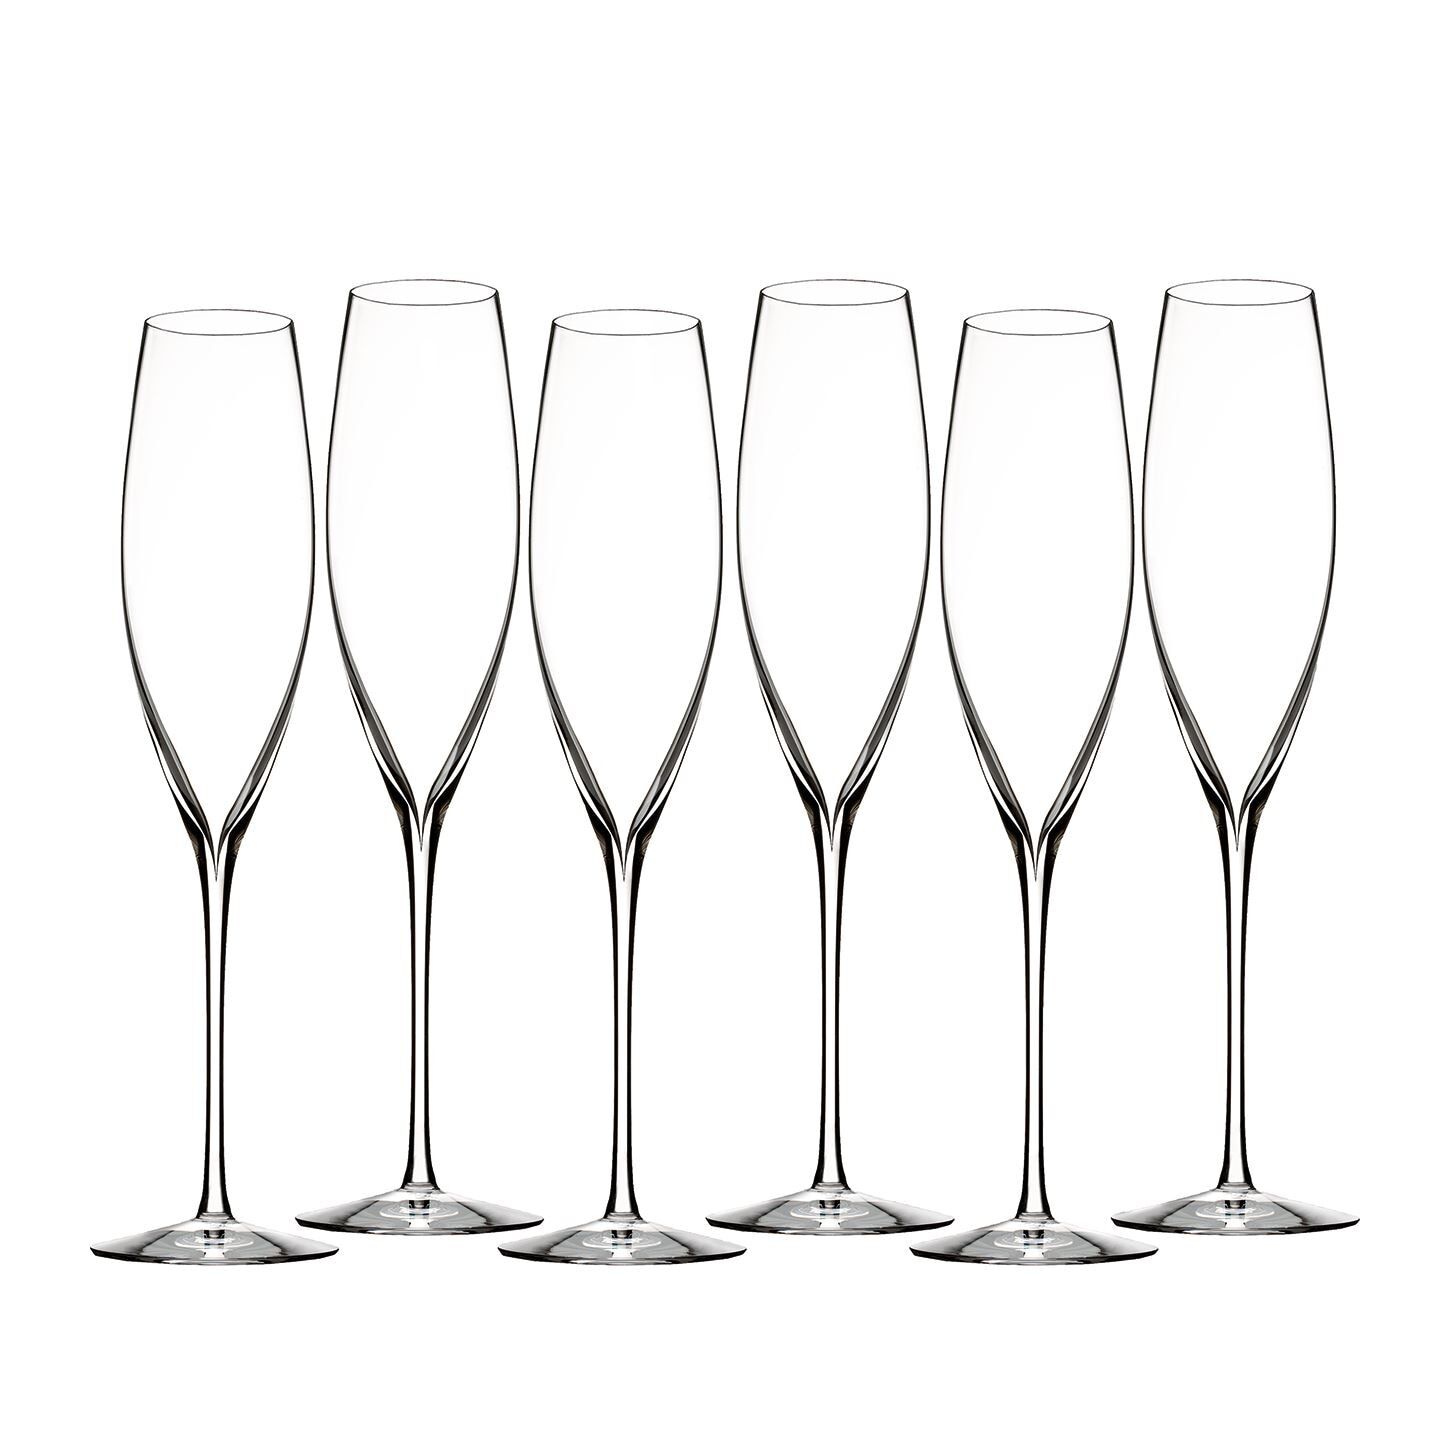 Waterford Elegance Classic Champagne Flute, Set of 6, Crystal